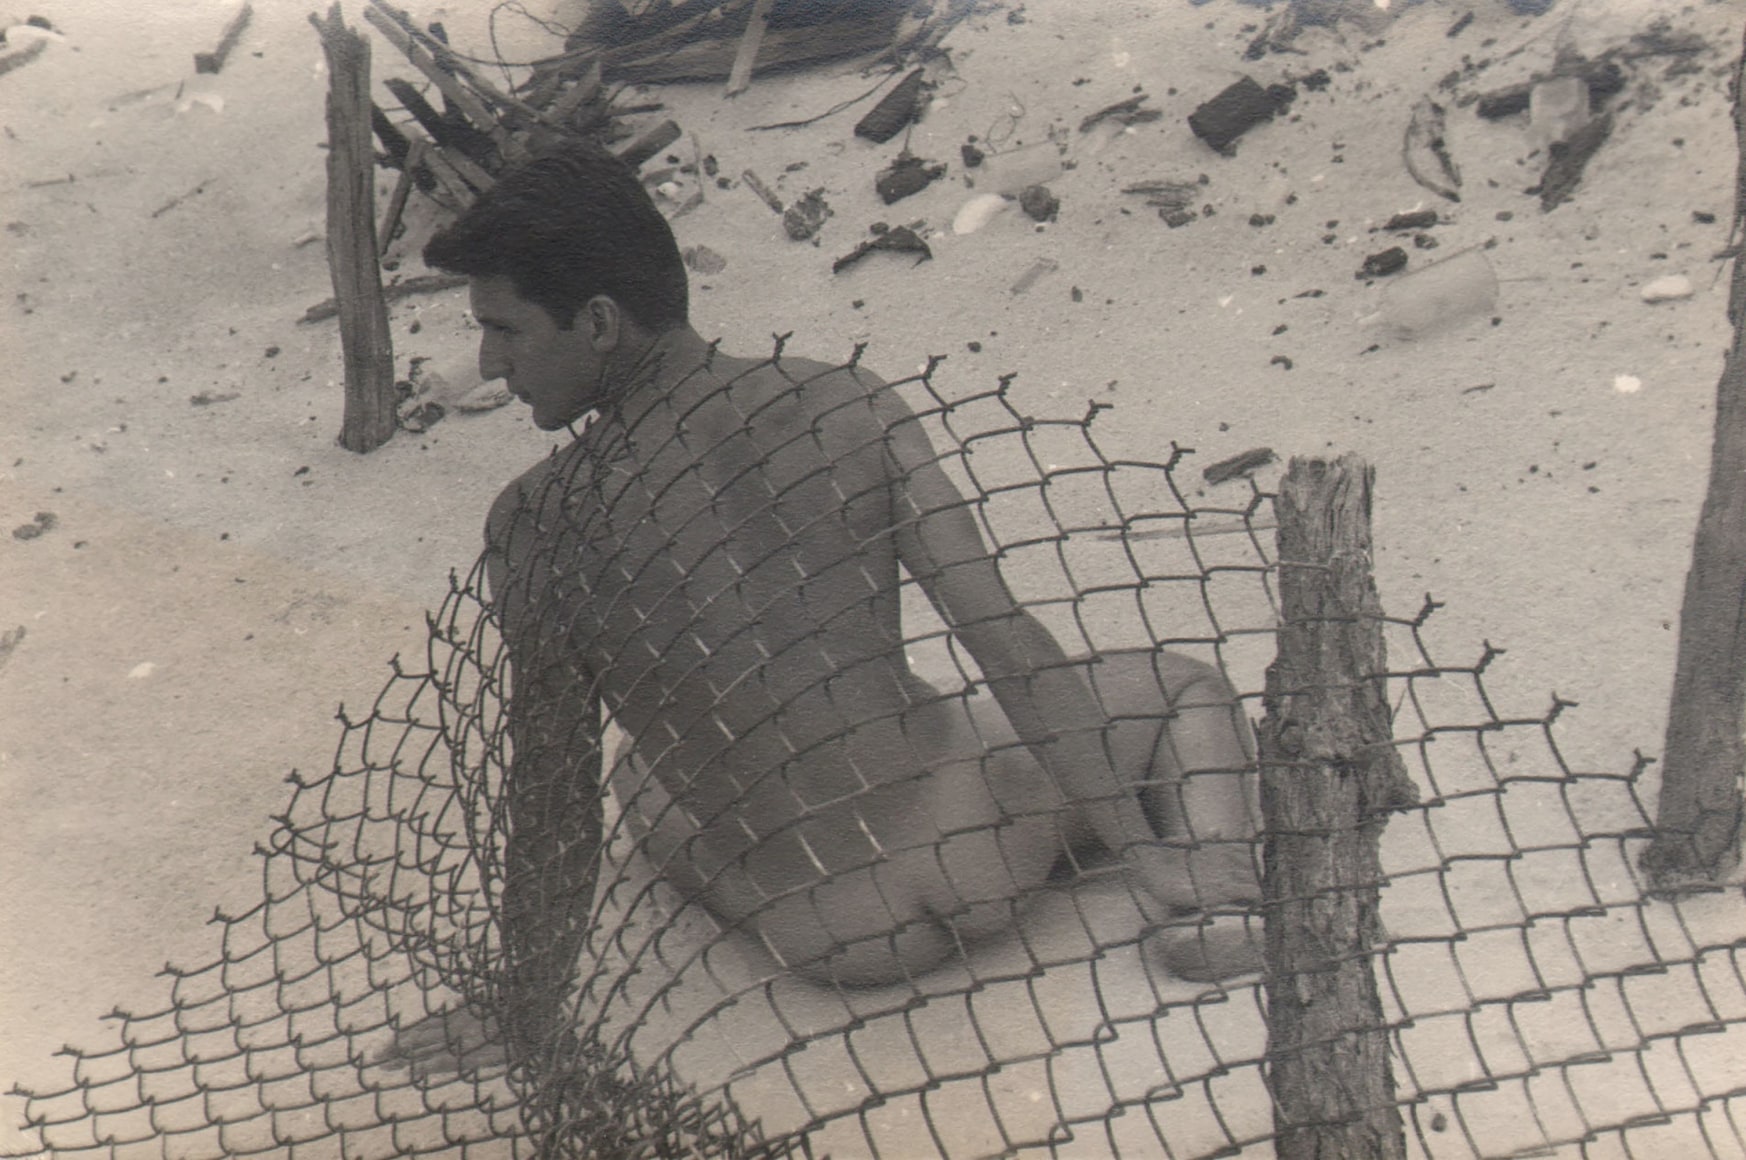 PaJaMa, Jack Fontan, ​c. 1945. Male nude seated in the sand, back to the camera, behind a chain link fence, head turned left.